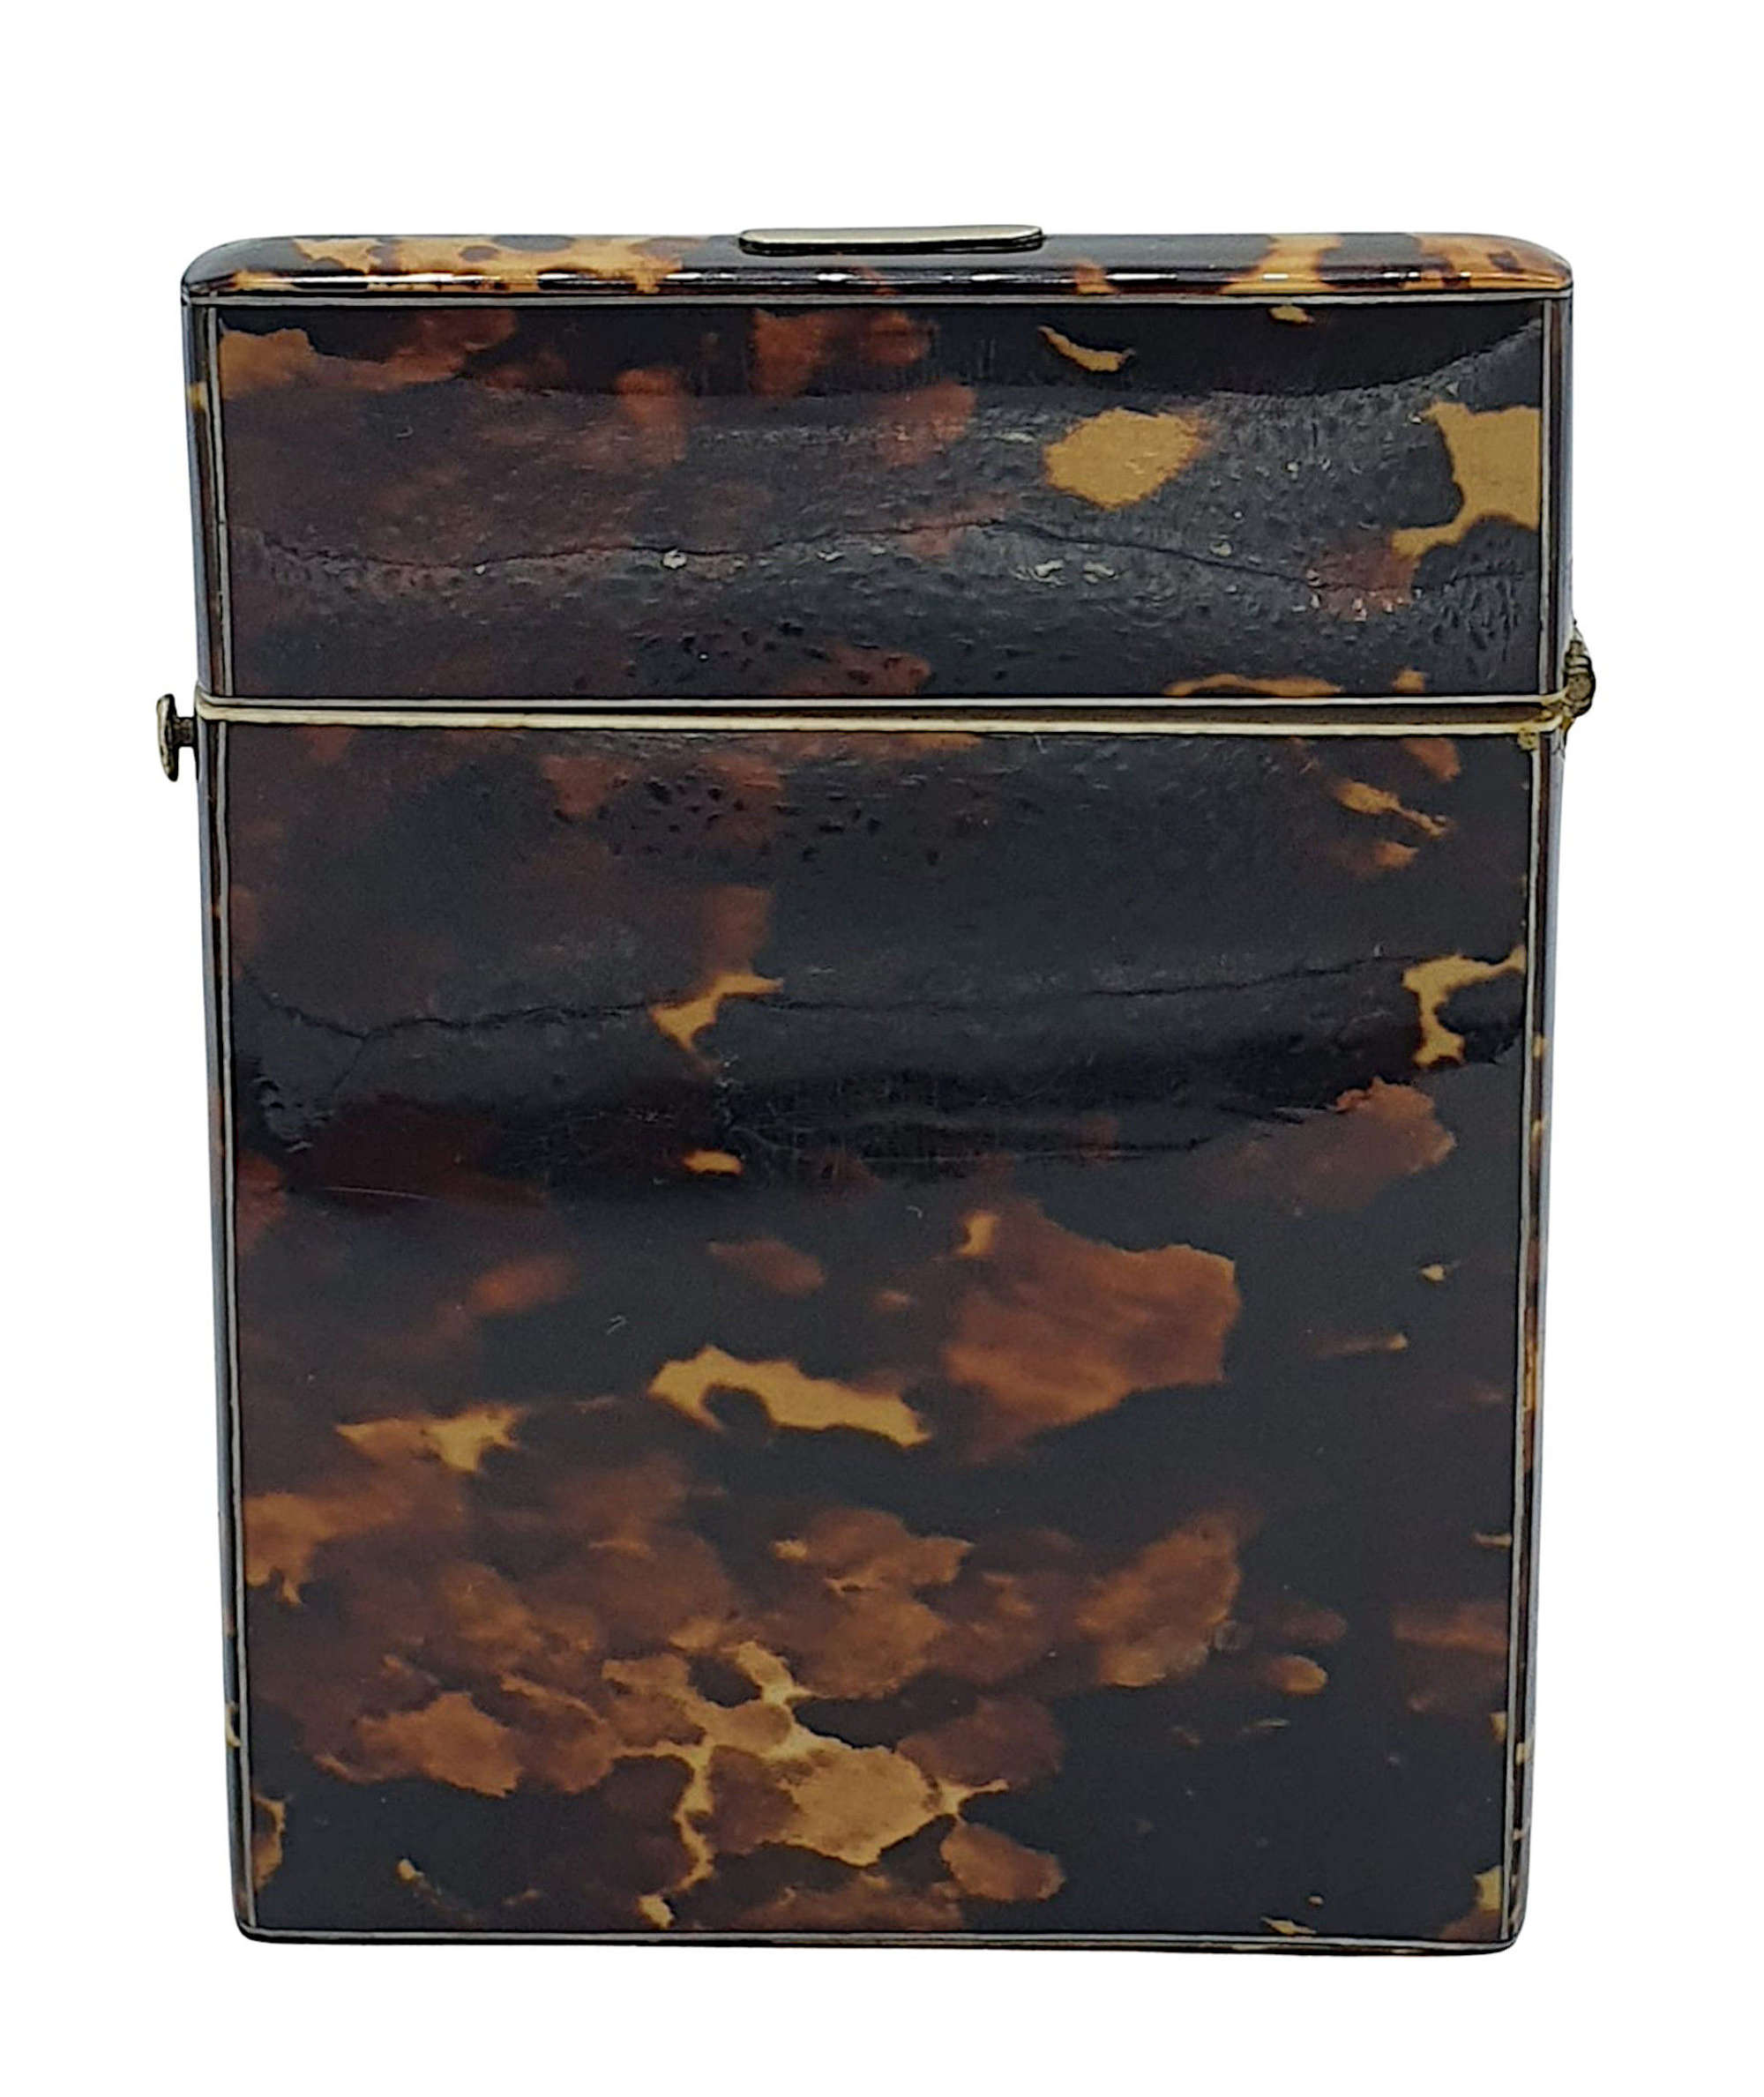 A Very Collectible 19th Century Tortoise Shell Card Case